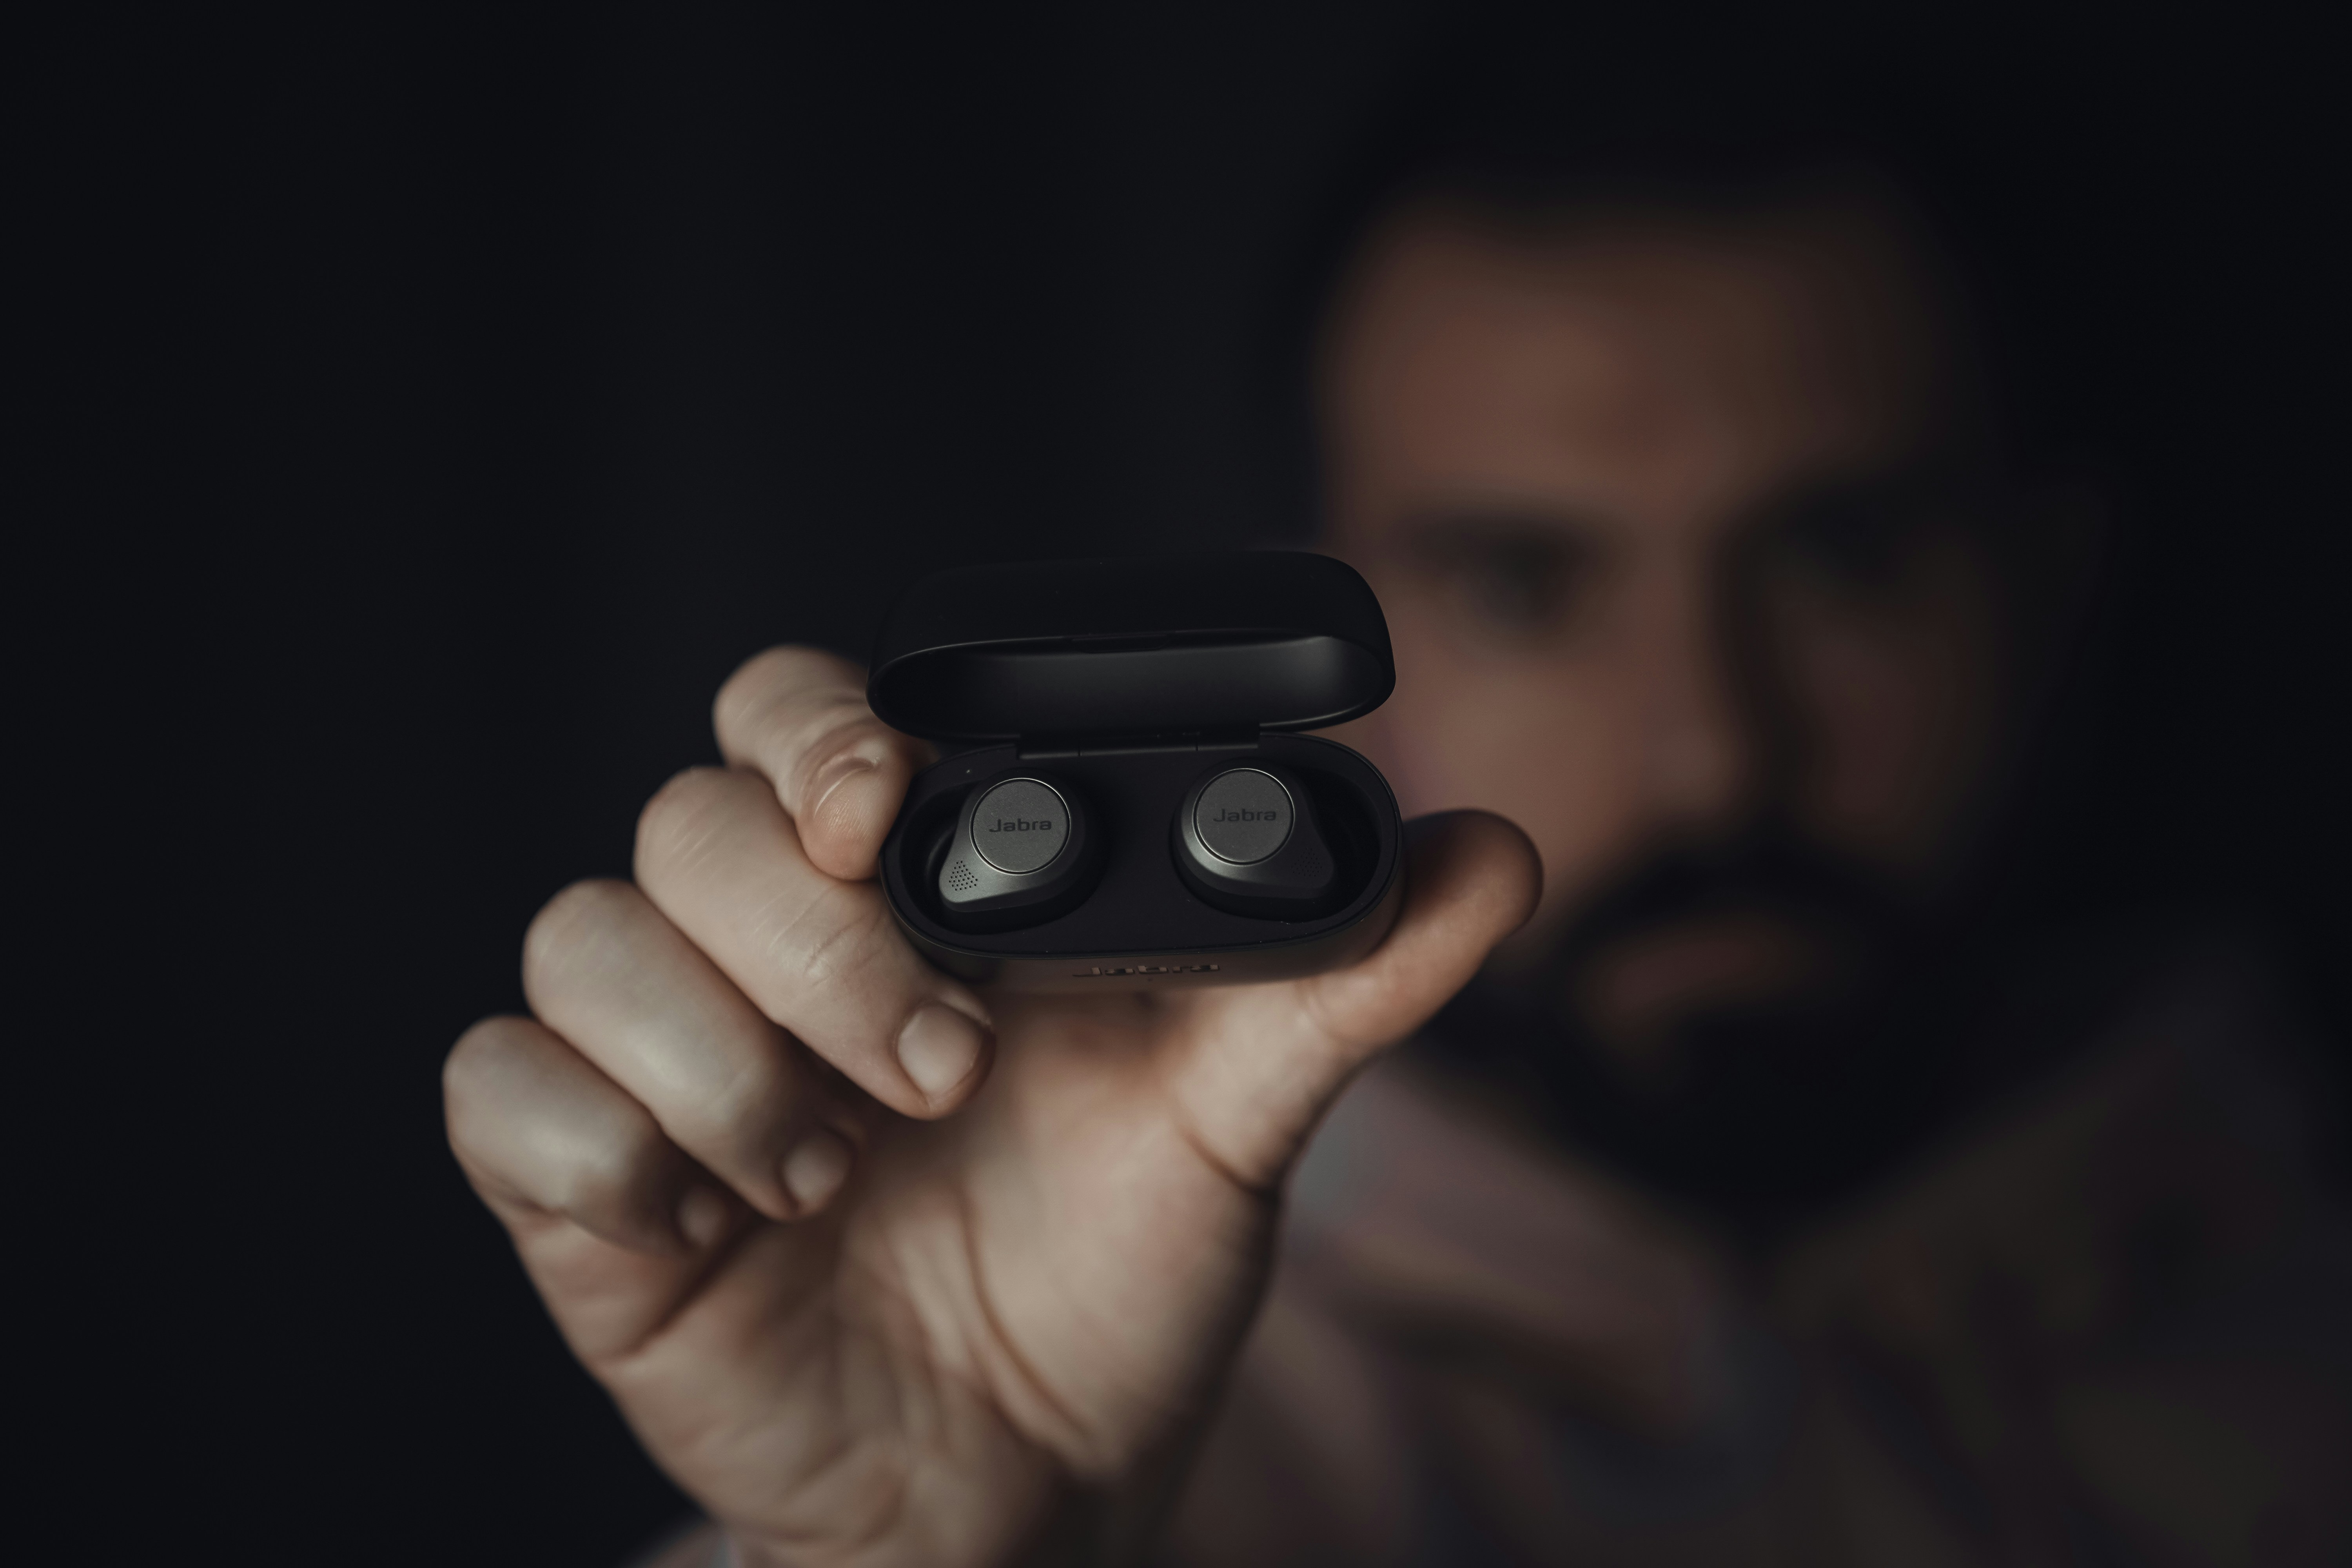 person holding black round device